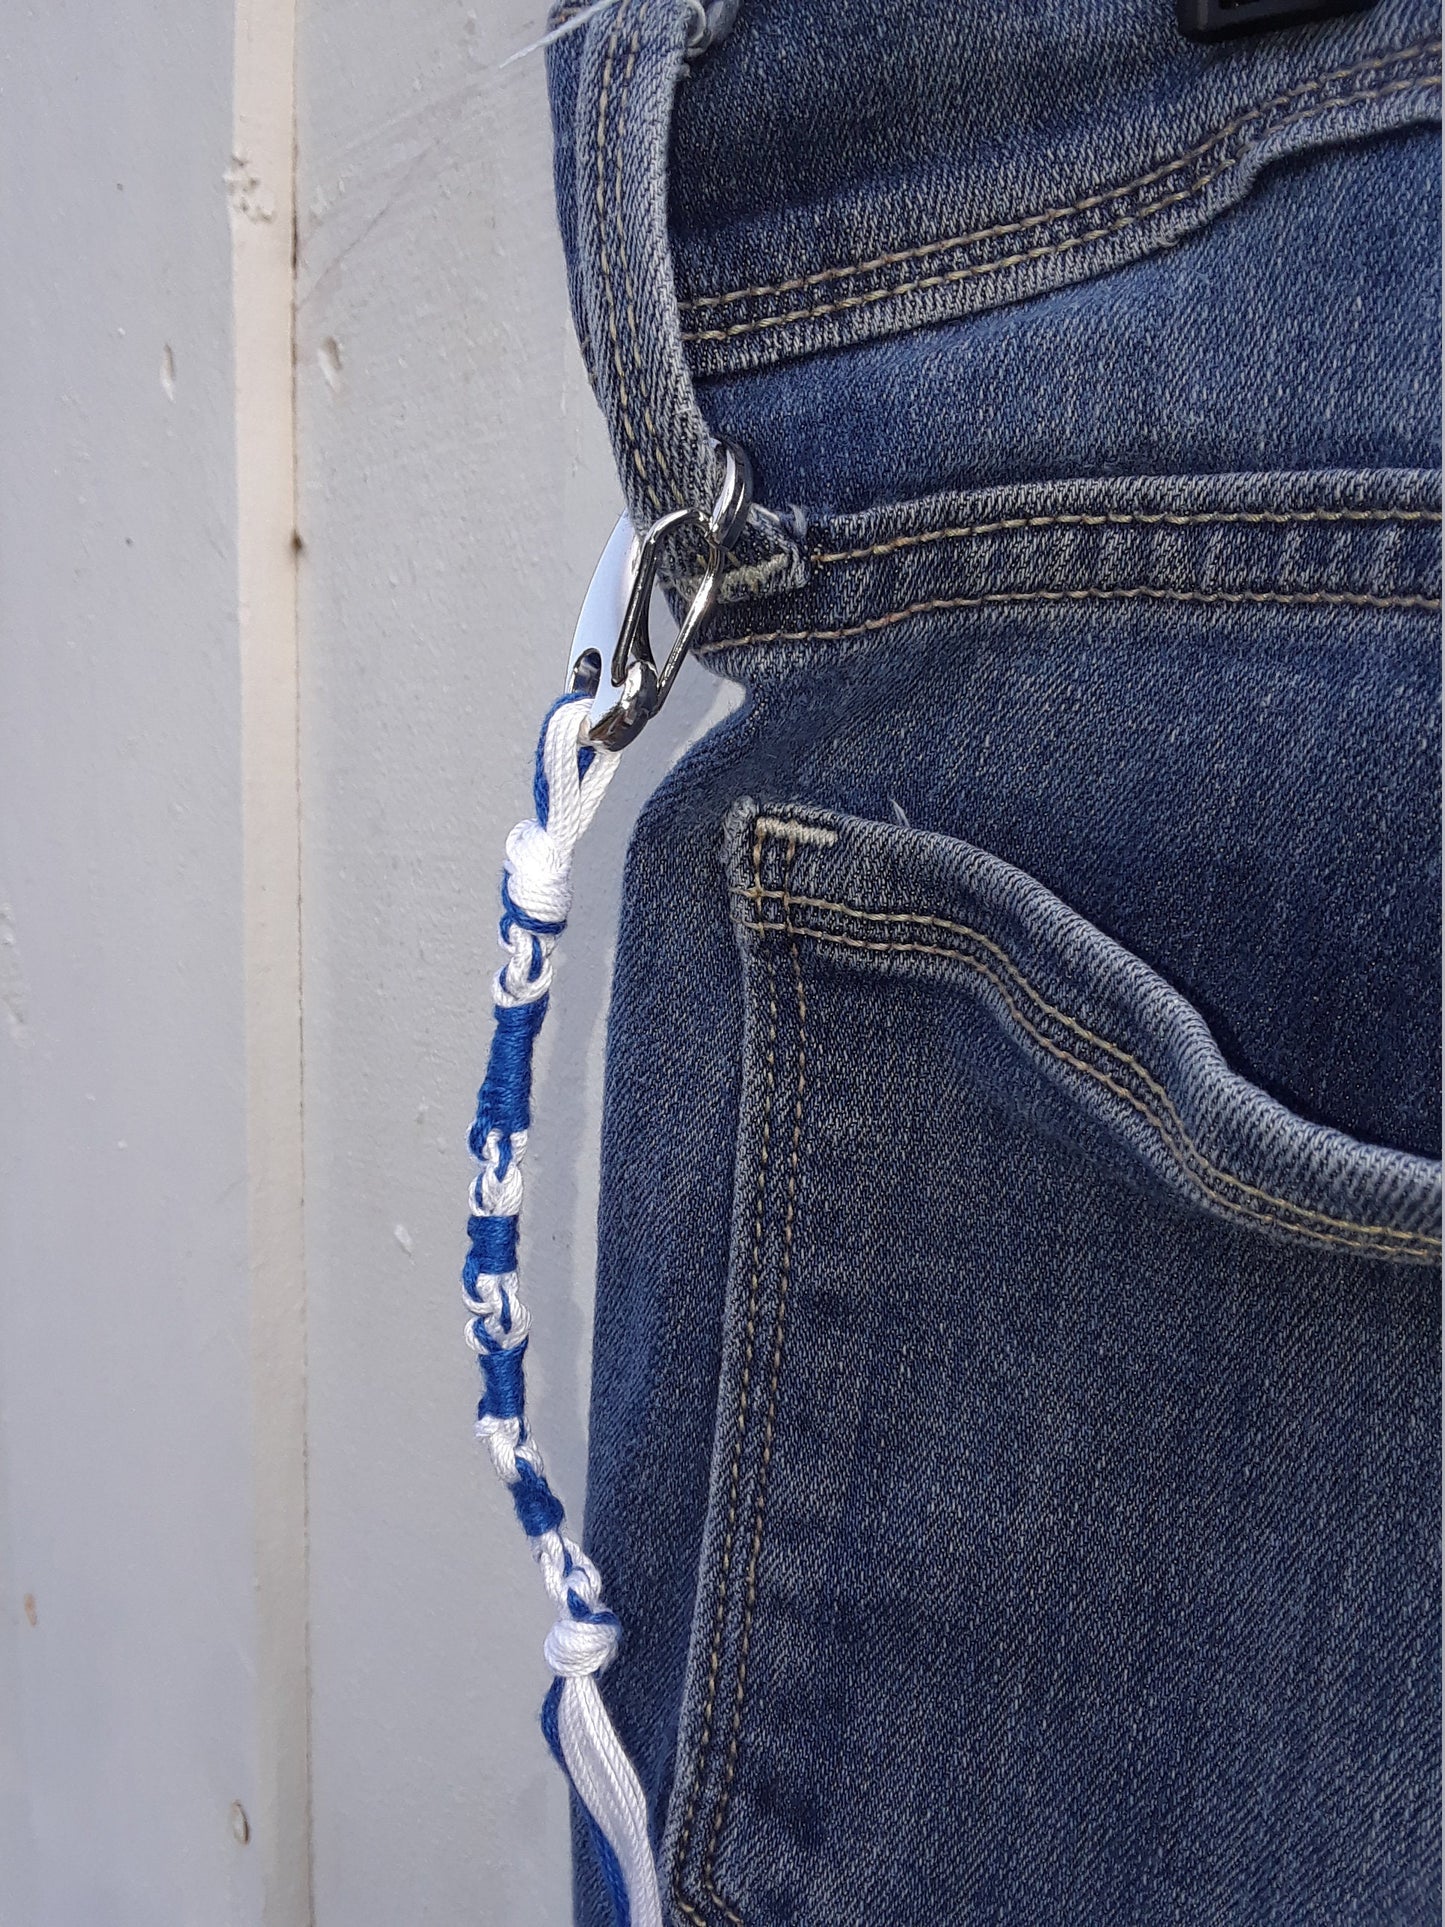 TZITZIT w/ SILVER CLIPS in Traditional Blue White Knotted With Yah's Name (10-5-6-5)